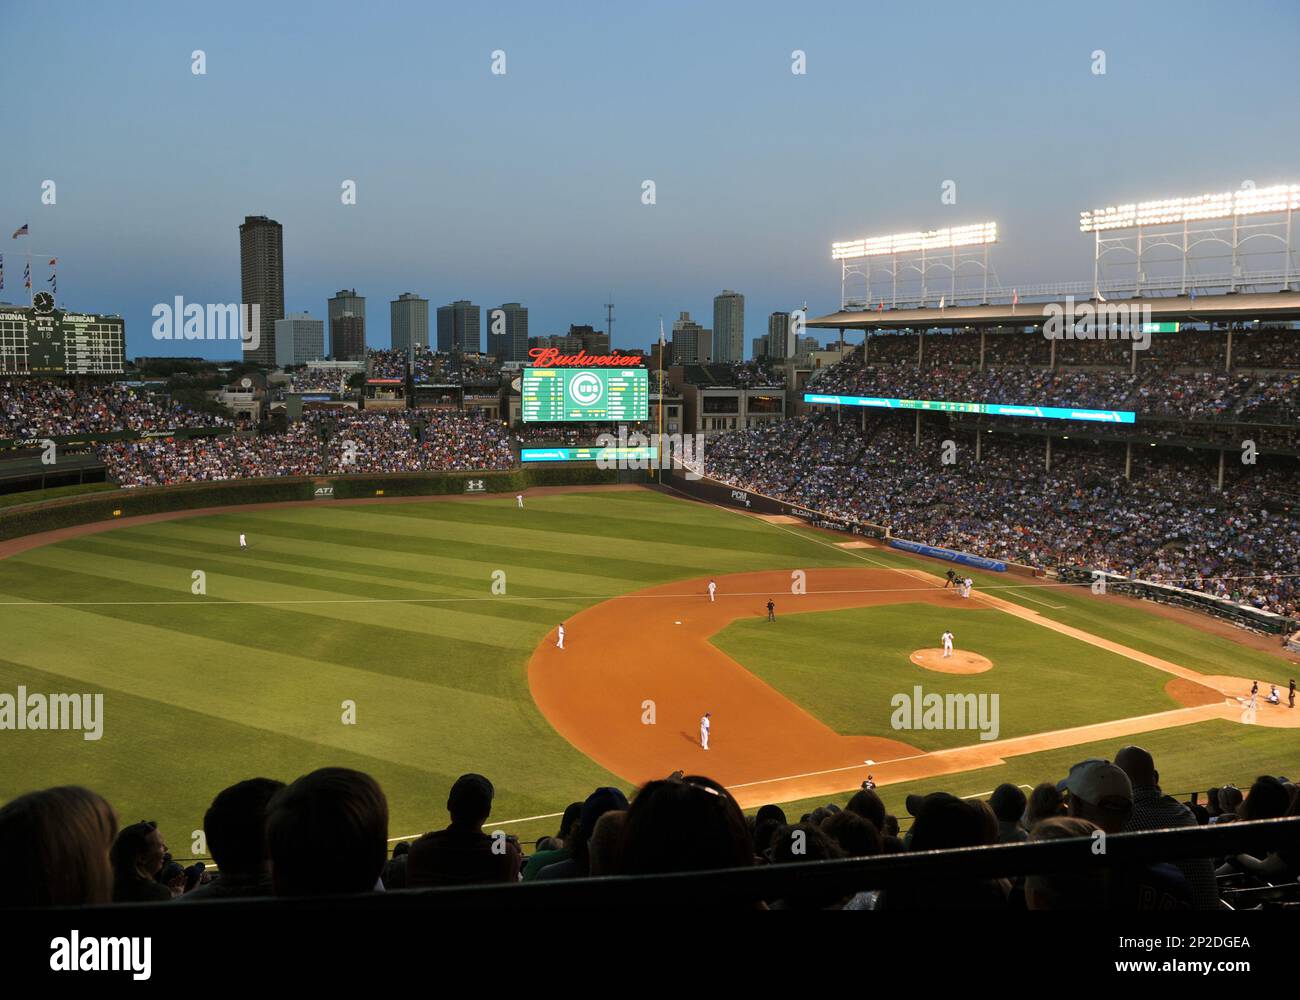 A panoramic, overhead view from third base at sunset shows Wrigley Field -  home of the Chicago Cubs - during a Major League Baseball game against the  Milwaukee Brewers August 12, 2015